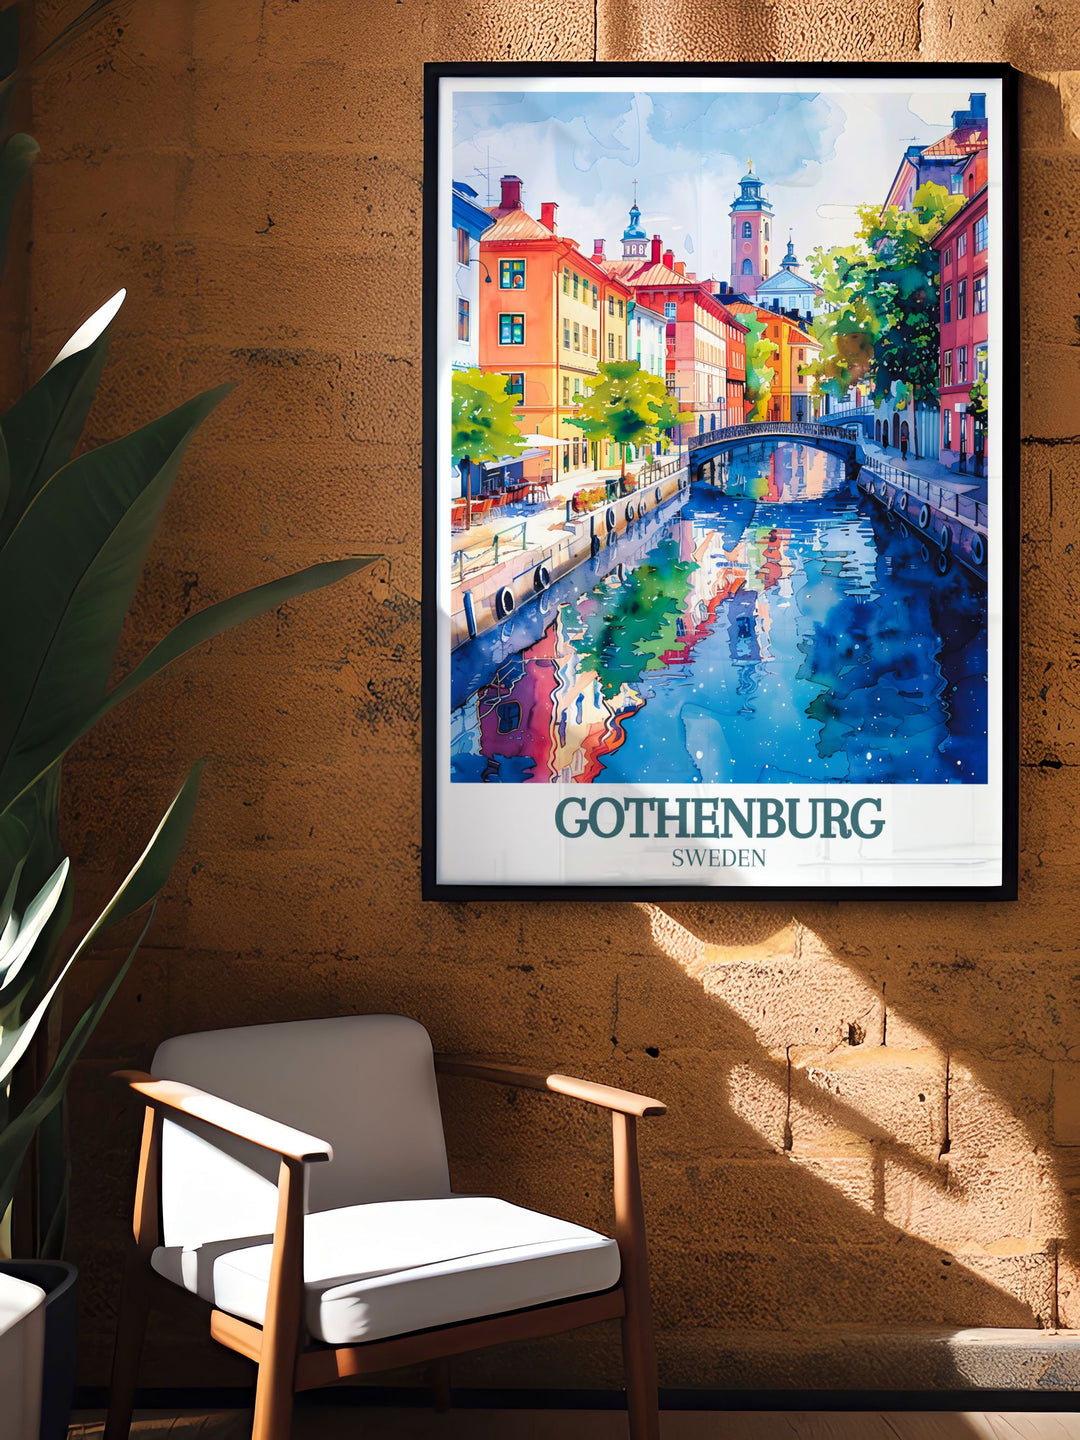 Showcasing the serene landscapes of Gothenburgs canals, this poster is ideal for those who appreciate tranquil urban scenes. The detailed illustrations bring the calming beauty of Gothenburgs waterways into your home decor.